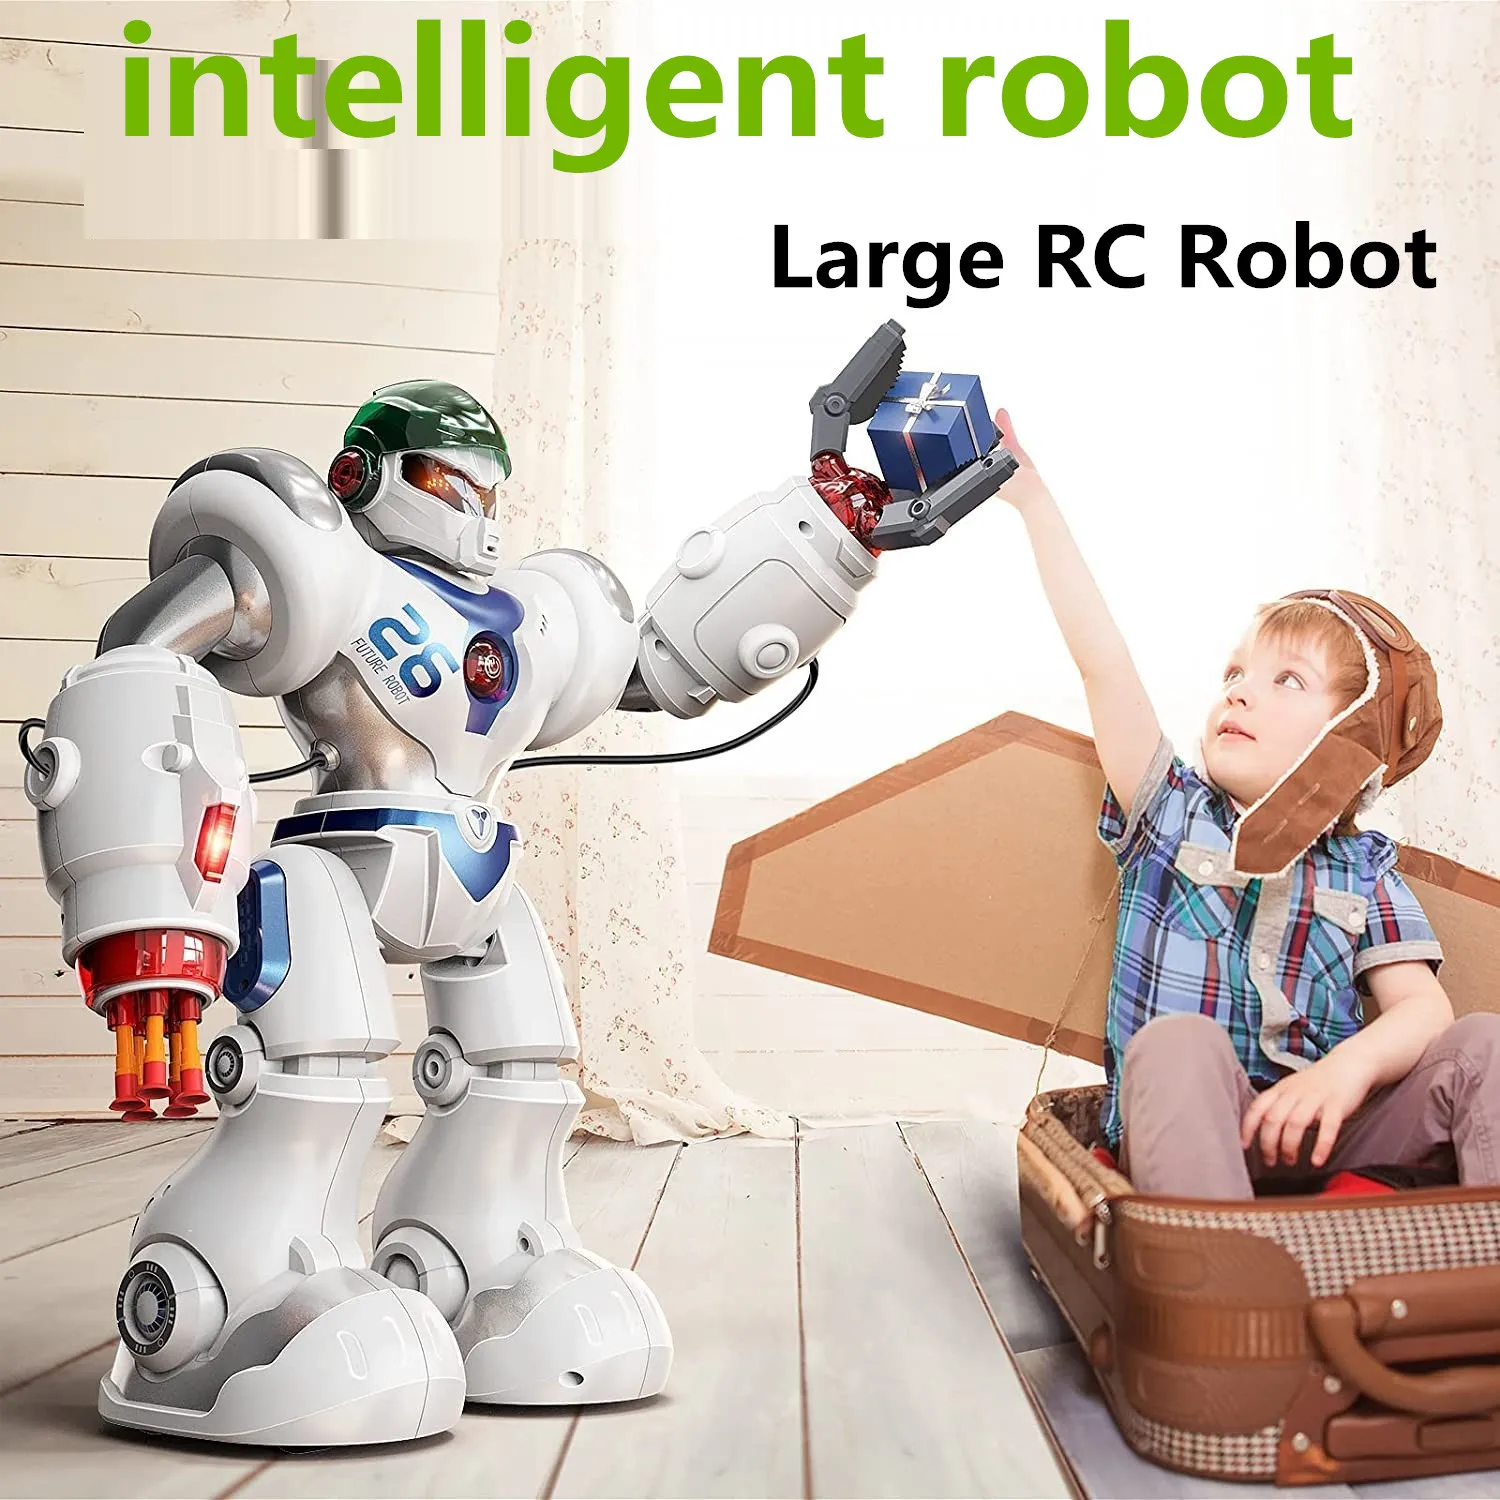 New RC Smart Robot 14inches RC Robot Kids Toy Intelligent Programming Electric Remote Control Robot Soft Darts Shooting